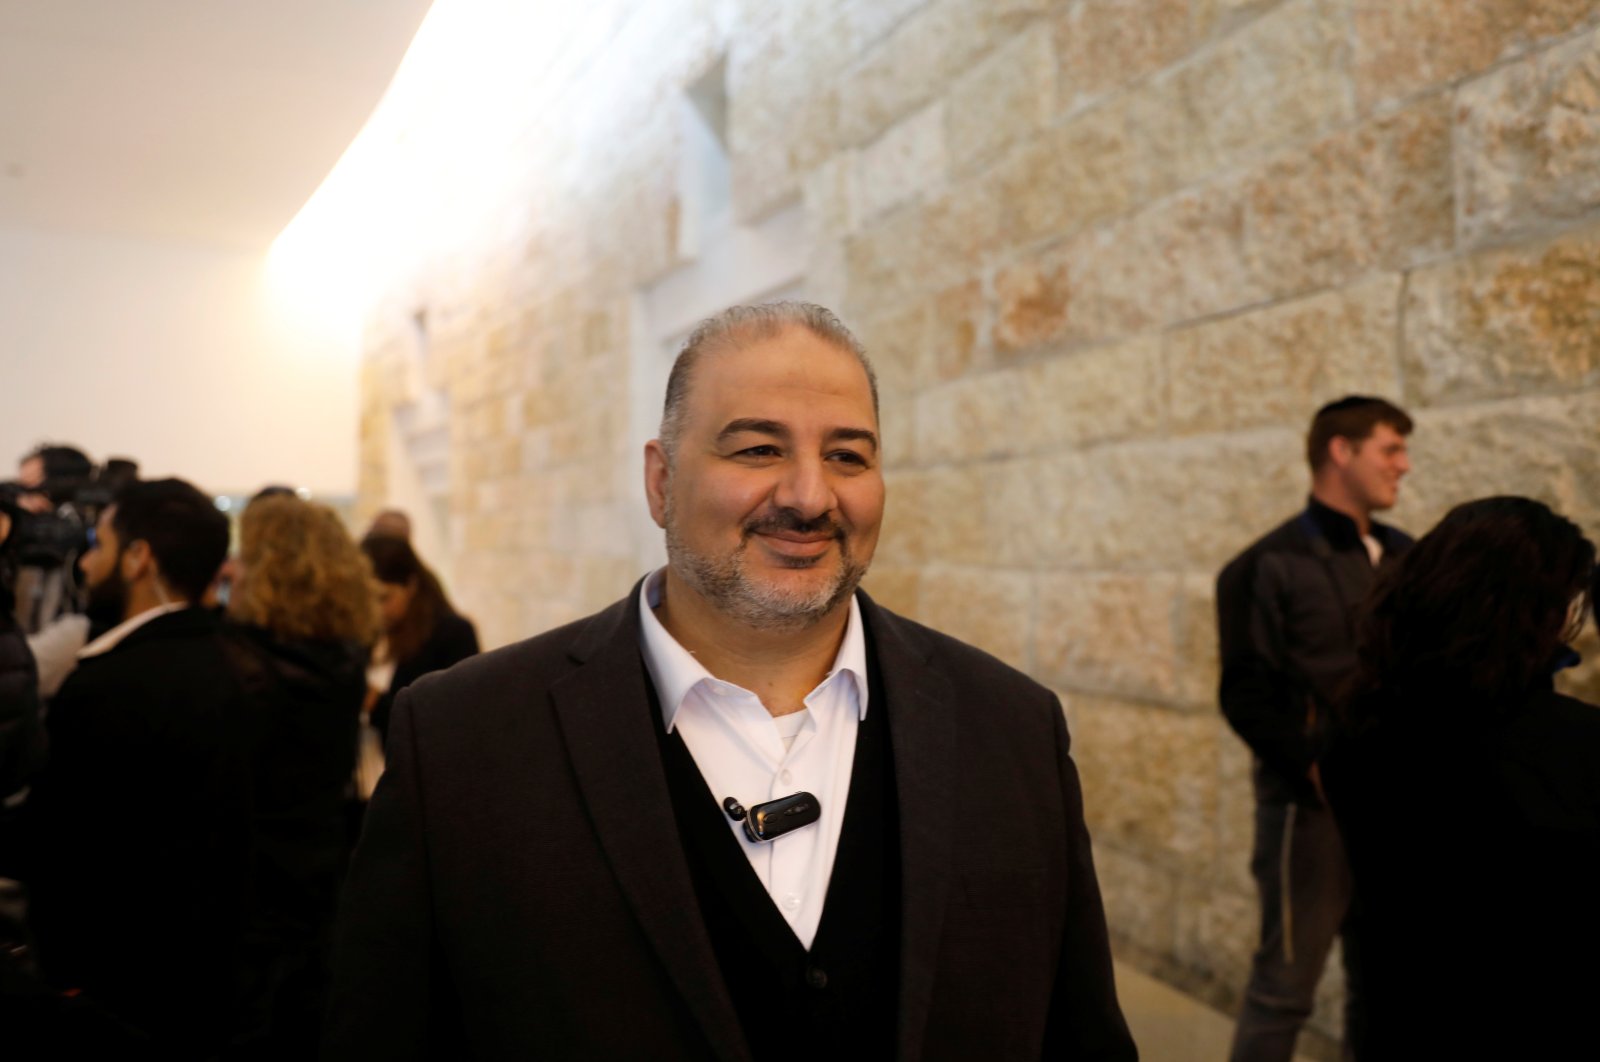 Mansour Abbas, who heads the Raam faction, attends a hearing Israel's Supreme Court in Jerusalem March 14, 2019. (Reuters Photo)